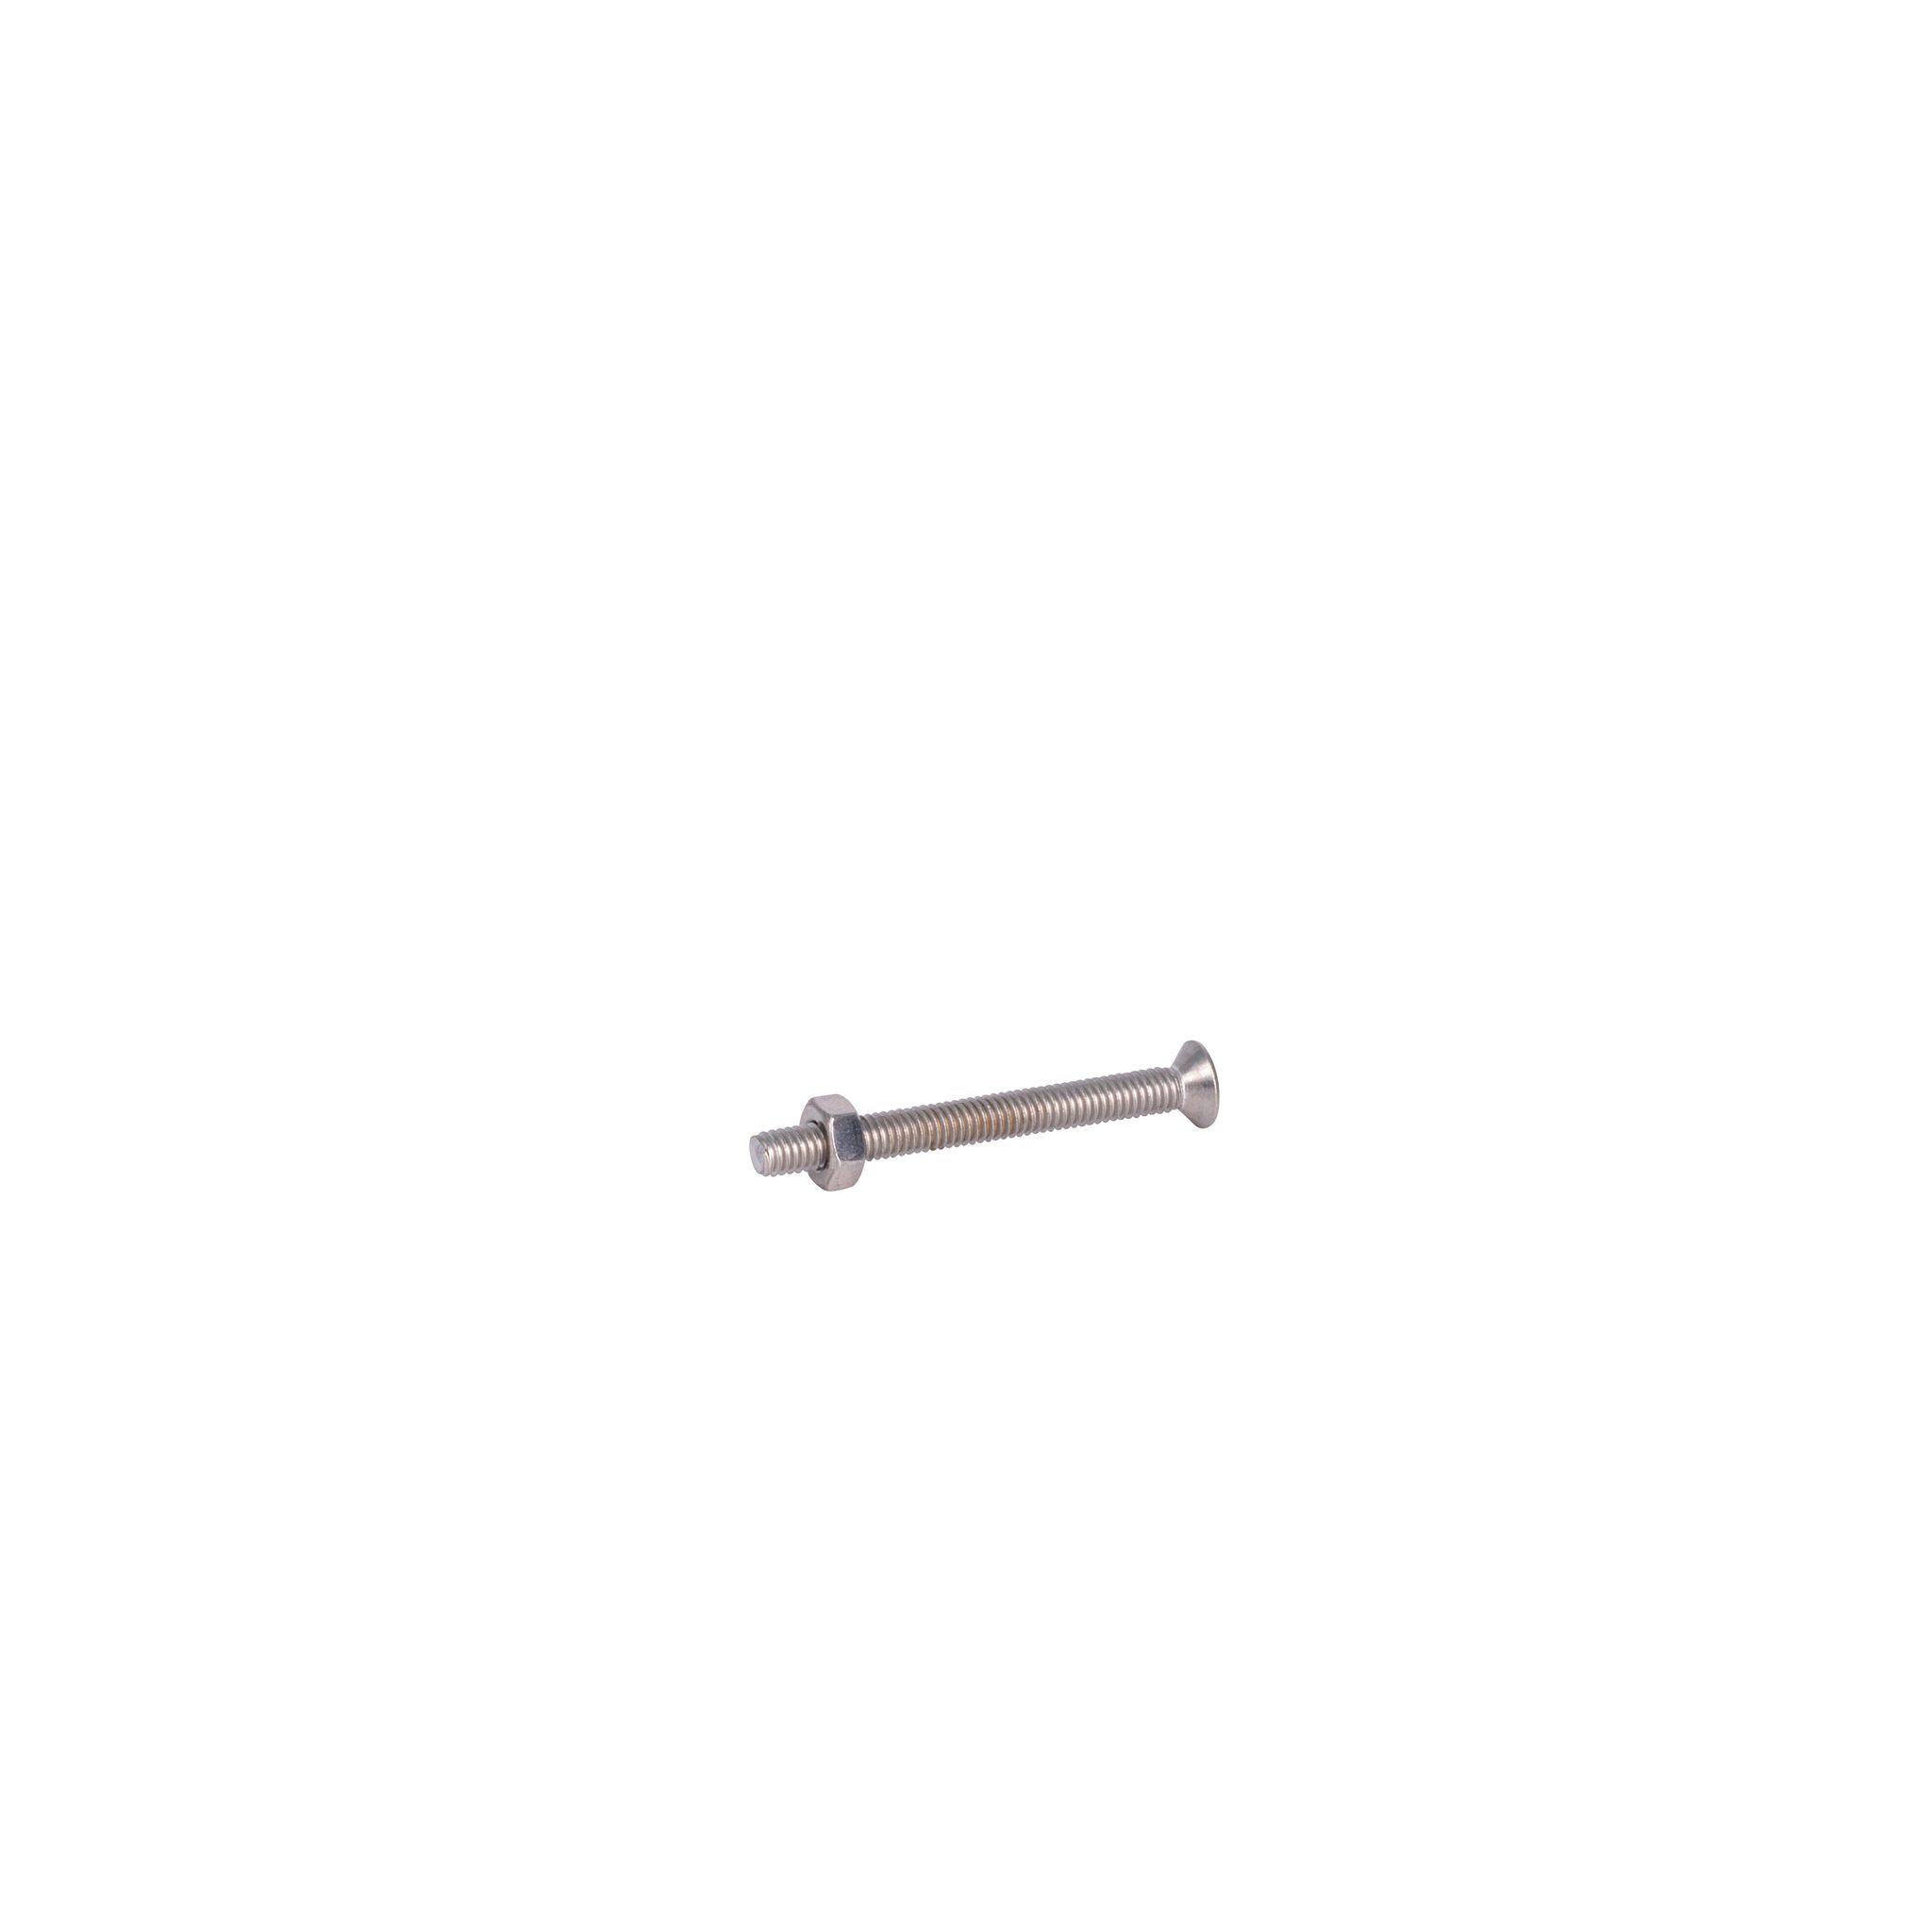 Countersunk bolt with nut (DIN 965/934-A4)